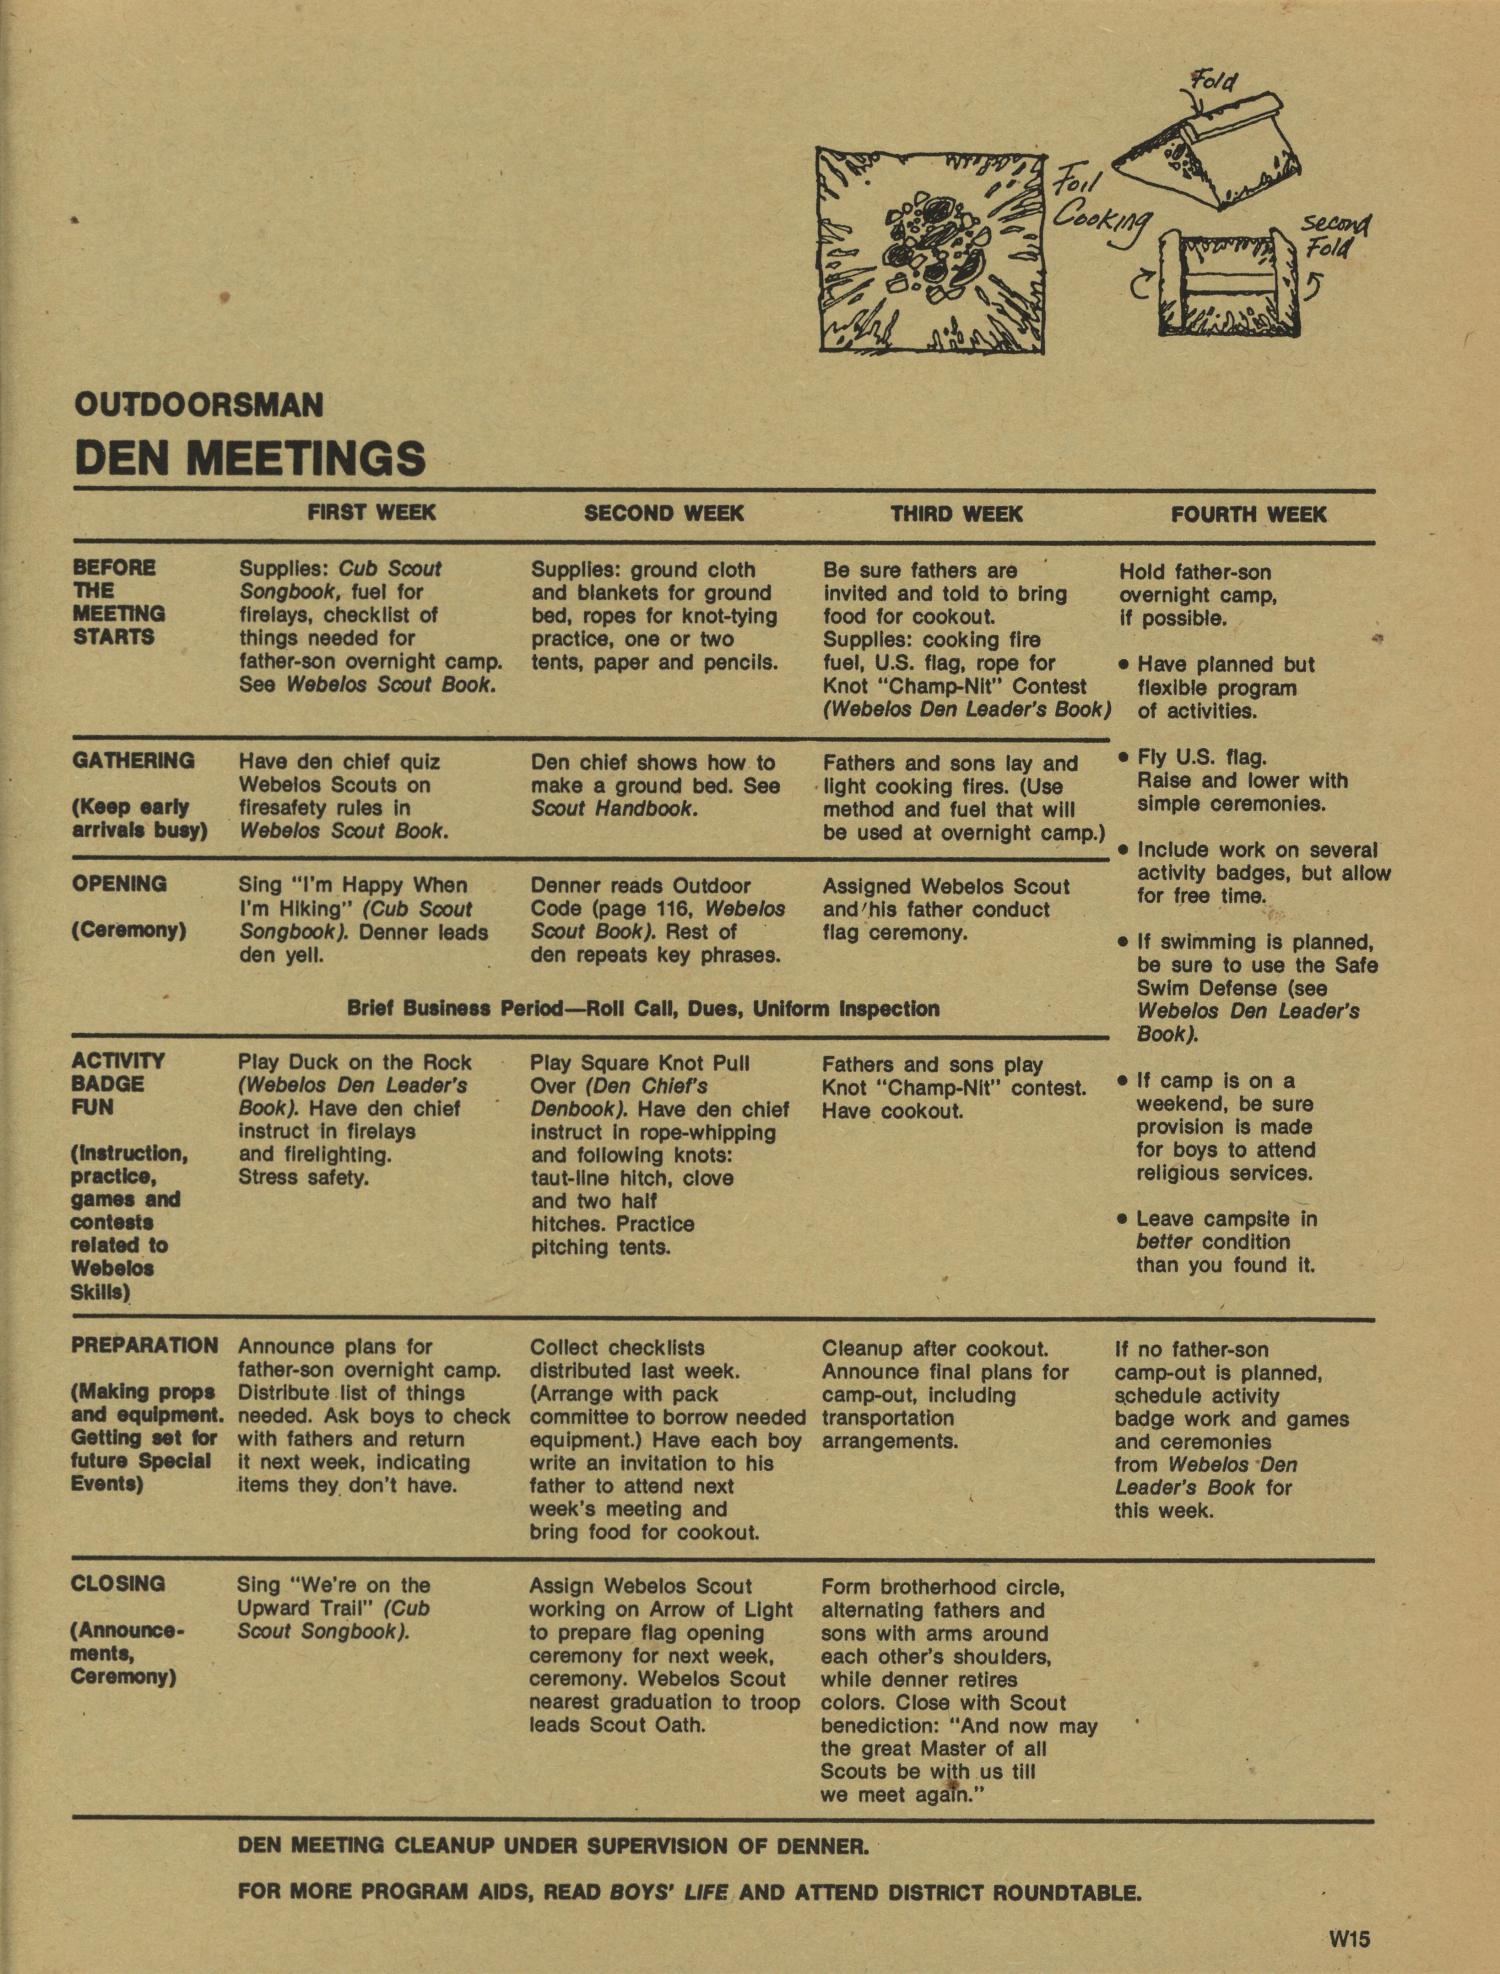 Scouting, Volume 62, Number 3, March-April 1974
                                                
                                                    15
                                                